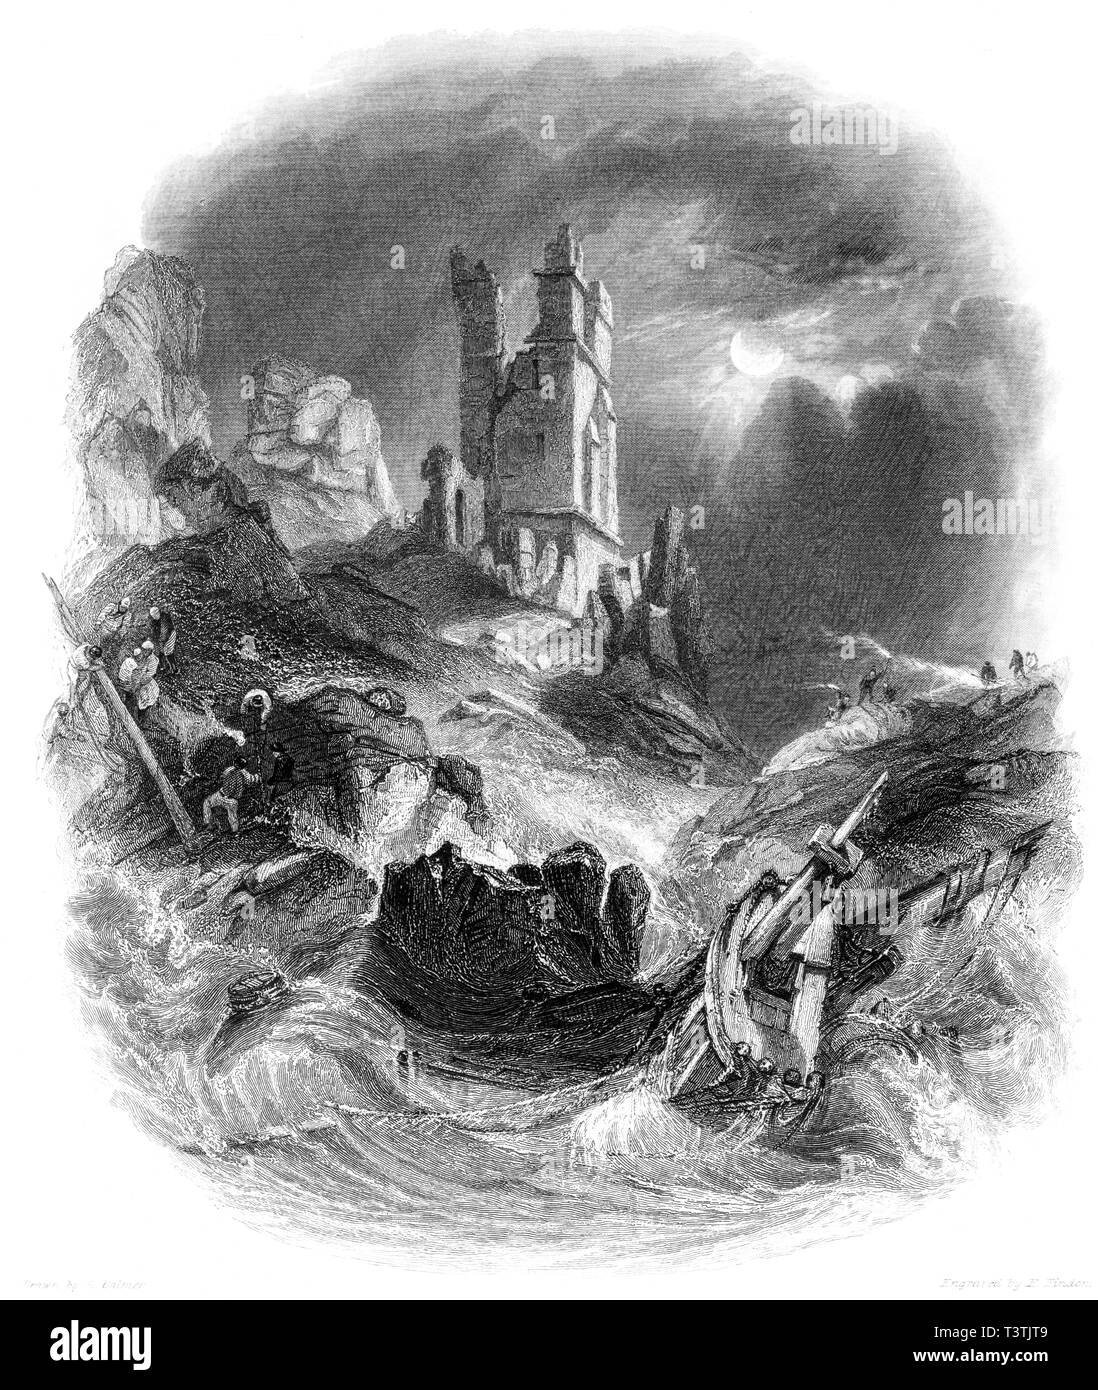 An engraving of Dunstanborough Castle (Dunstanburgh) by moonlight scanned at high resolution from a book published in 1842. Believed copyright free. Stock Photo